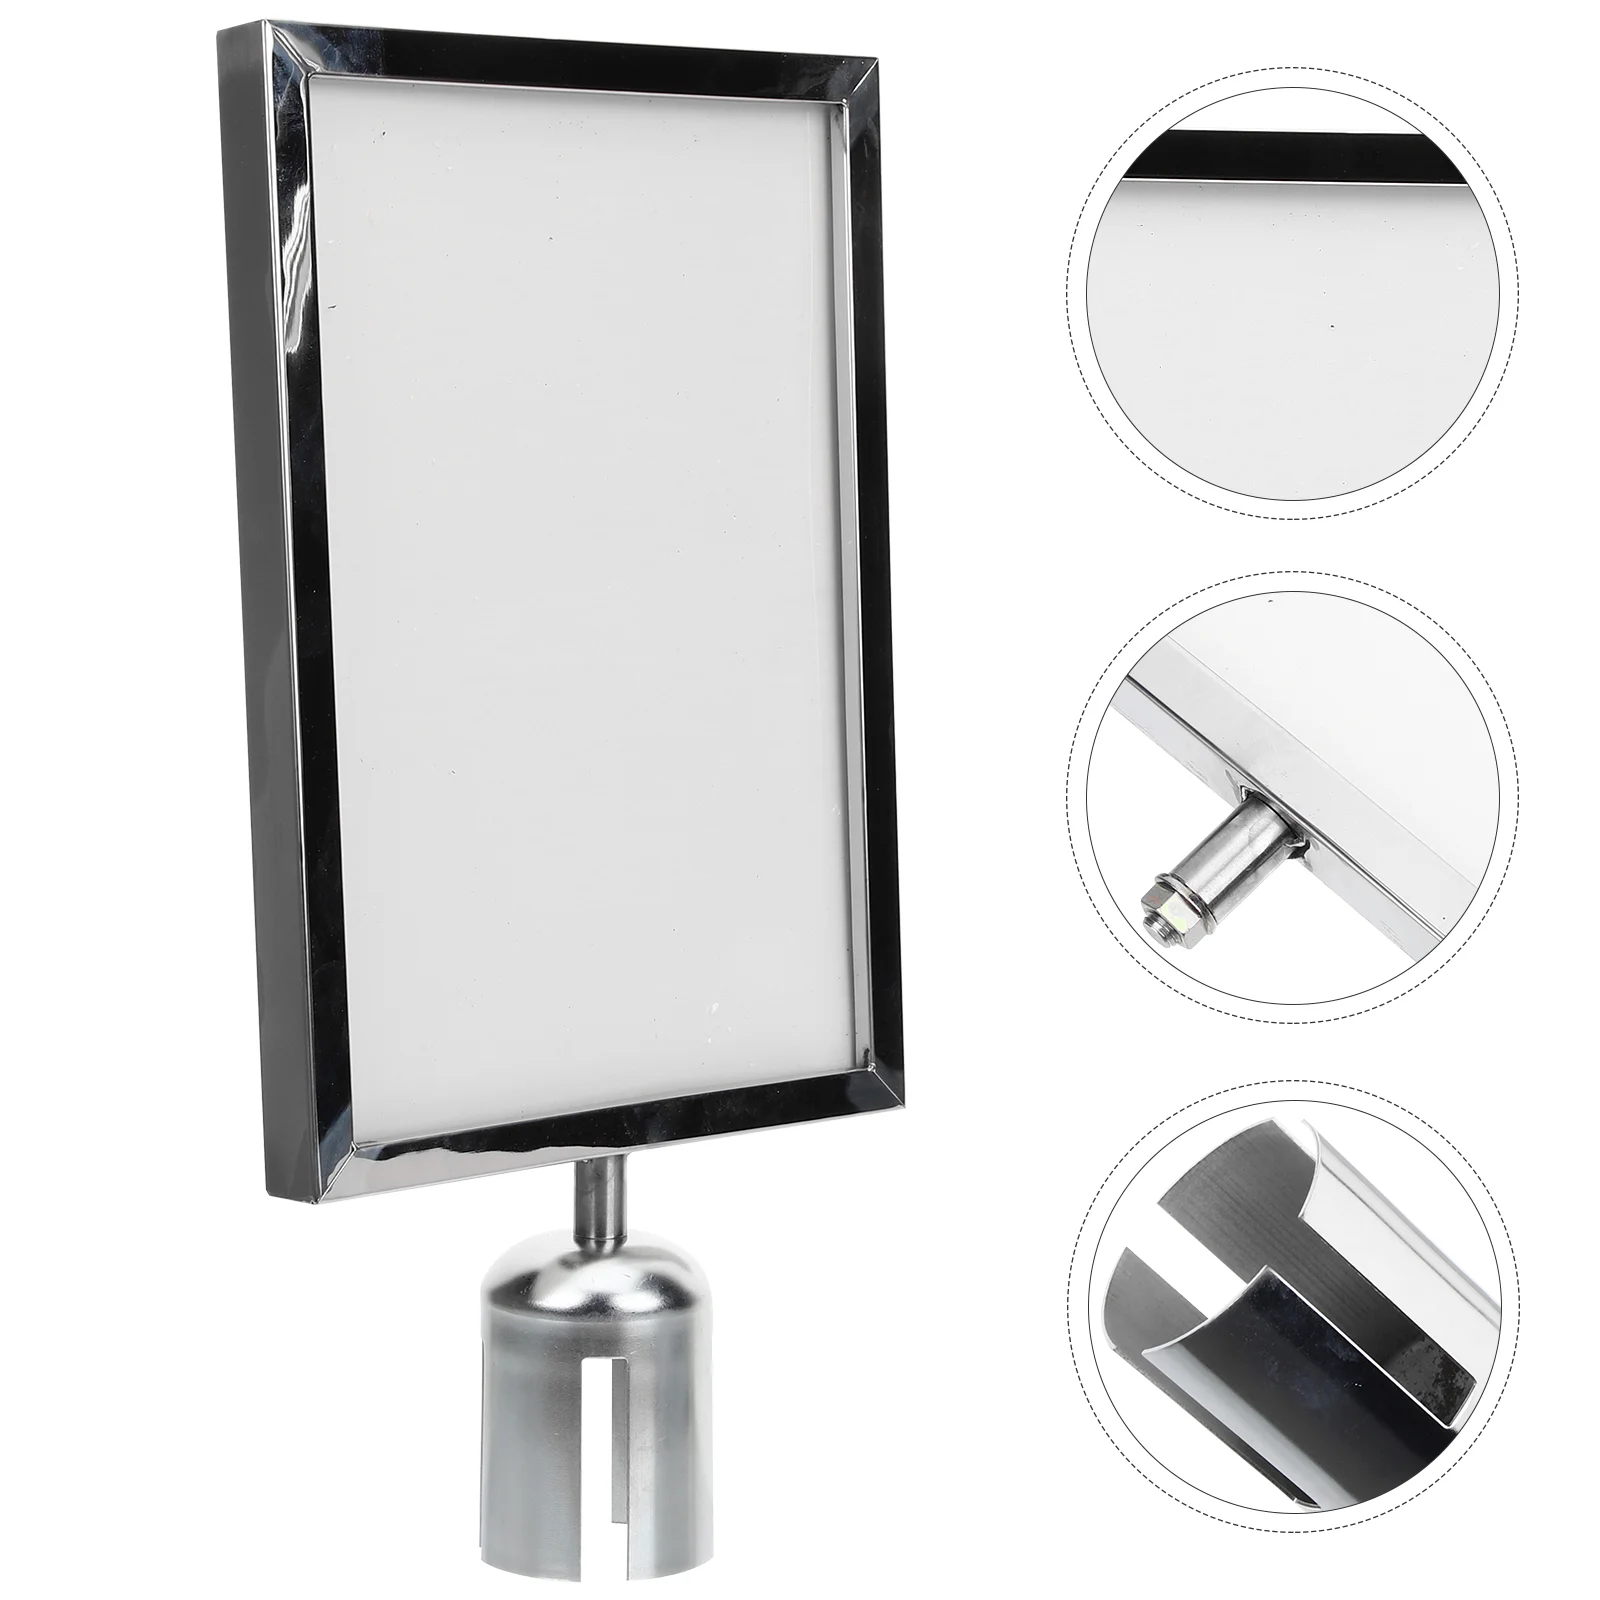 

Sign Stanchion Frame Holder Portrait Stand Belt Crowd Control Retractable Sided Double Barrier Queue Display Signs A Stanchions